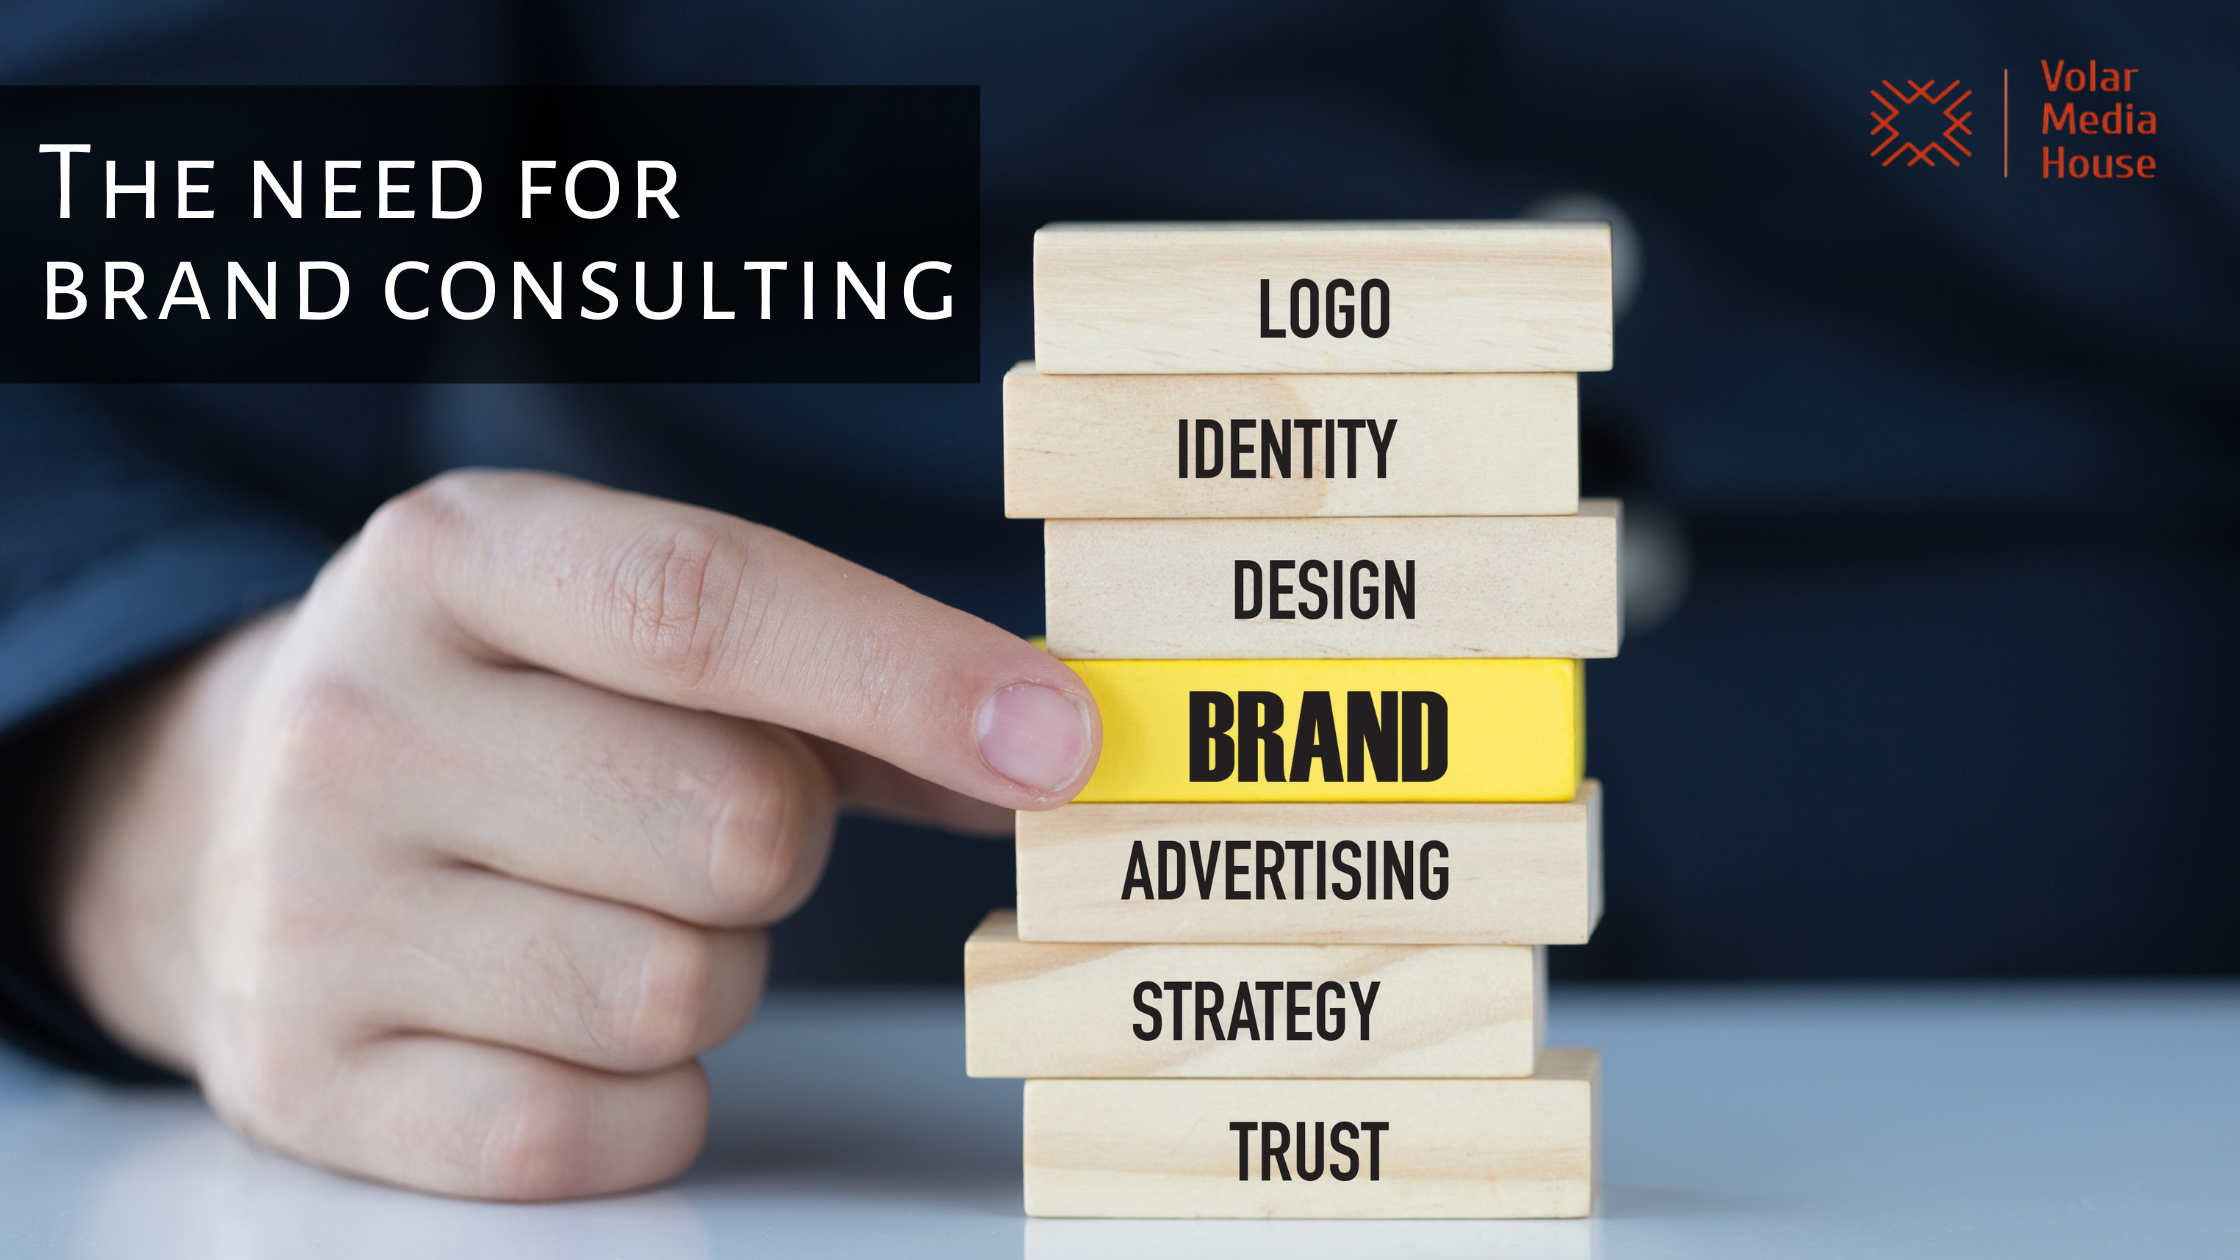 The need for brand consulting